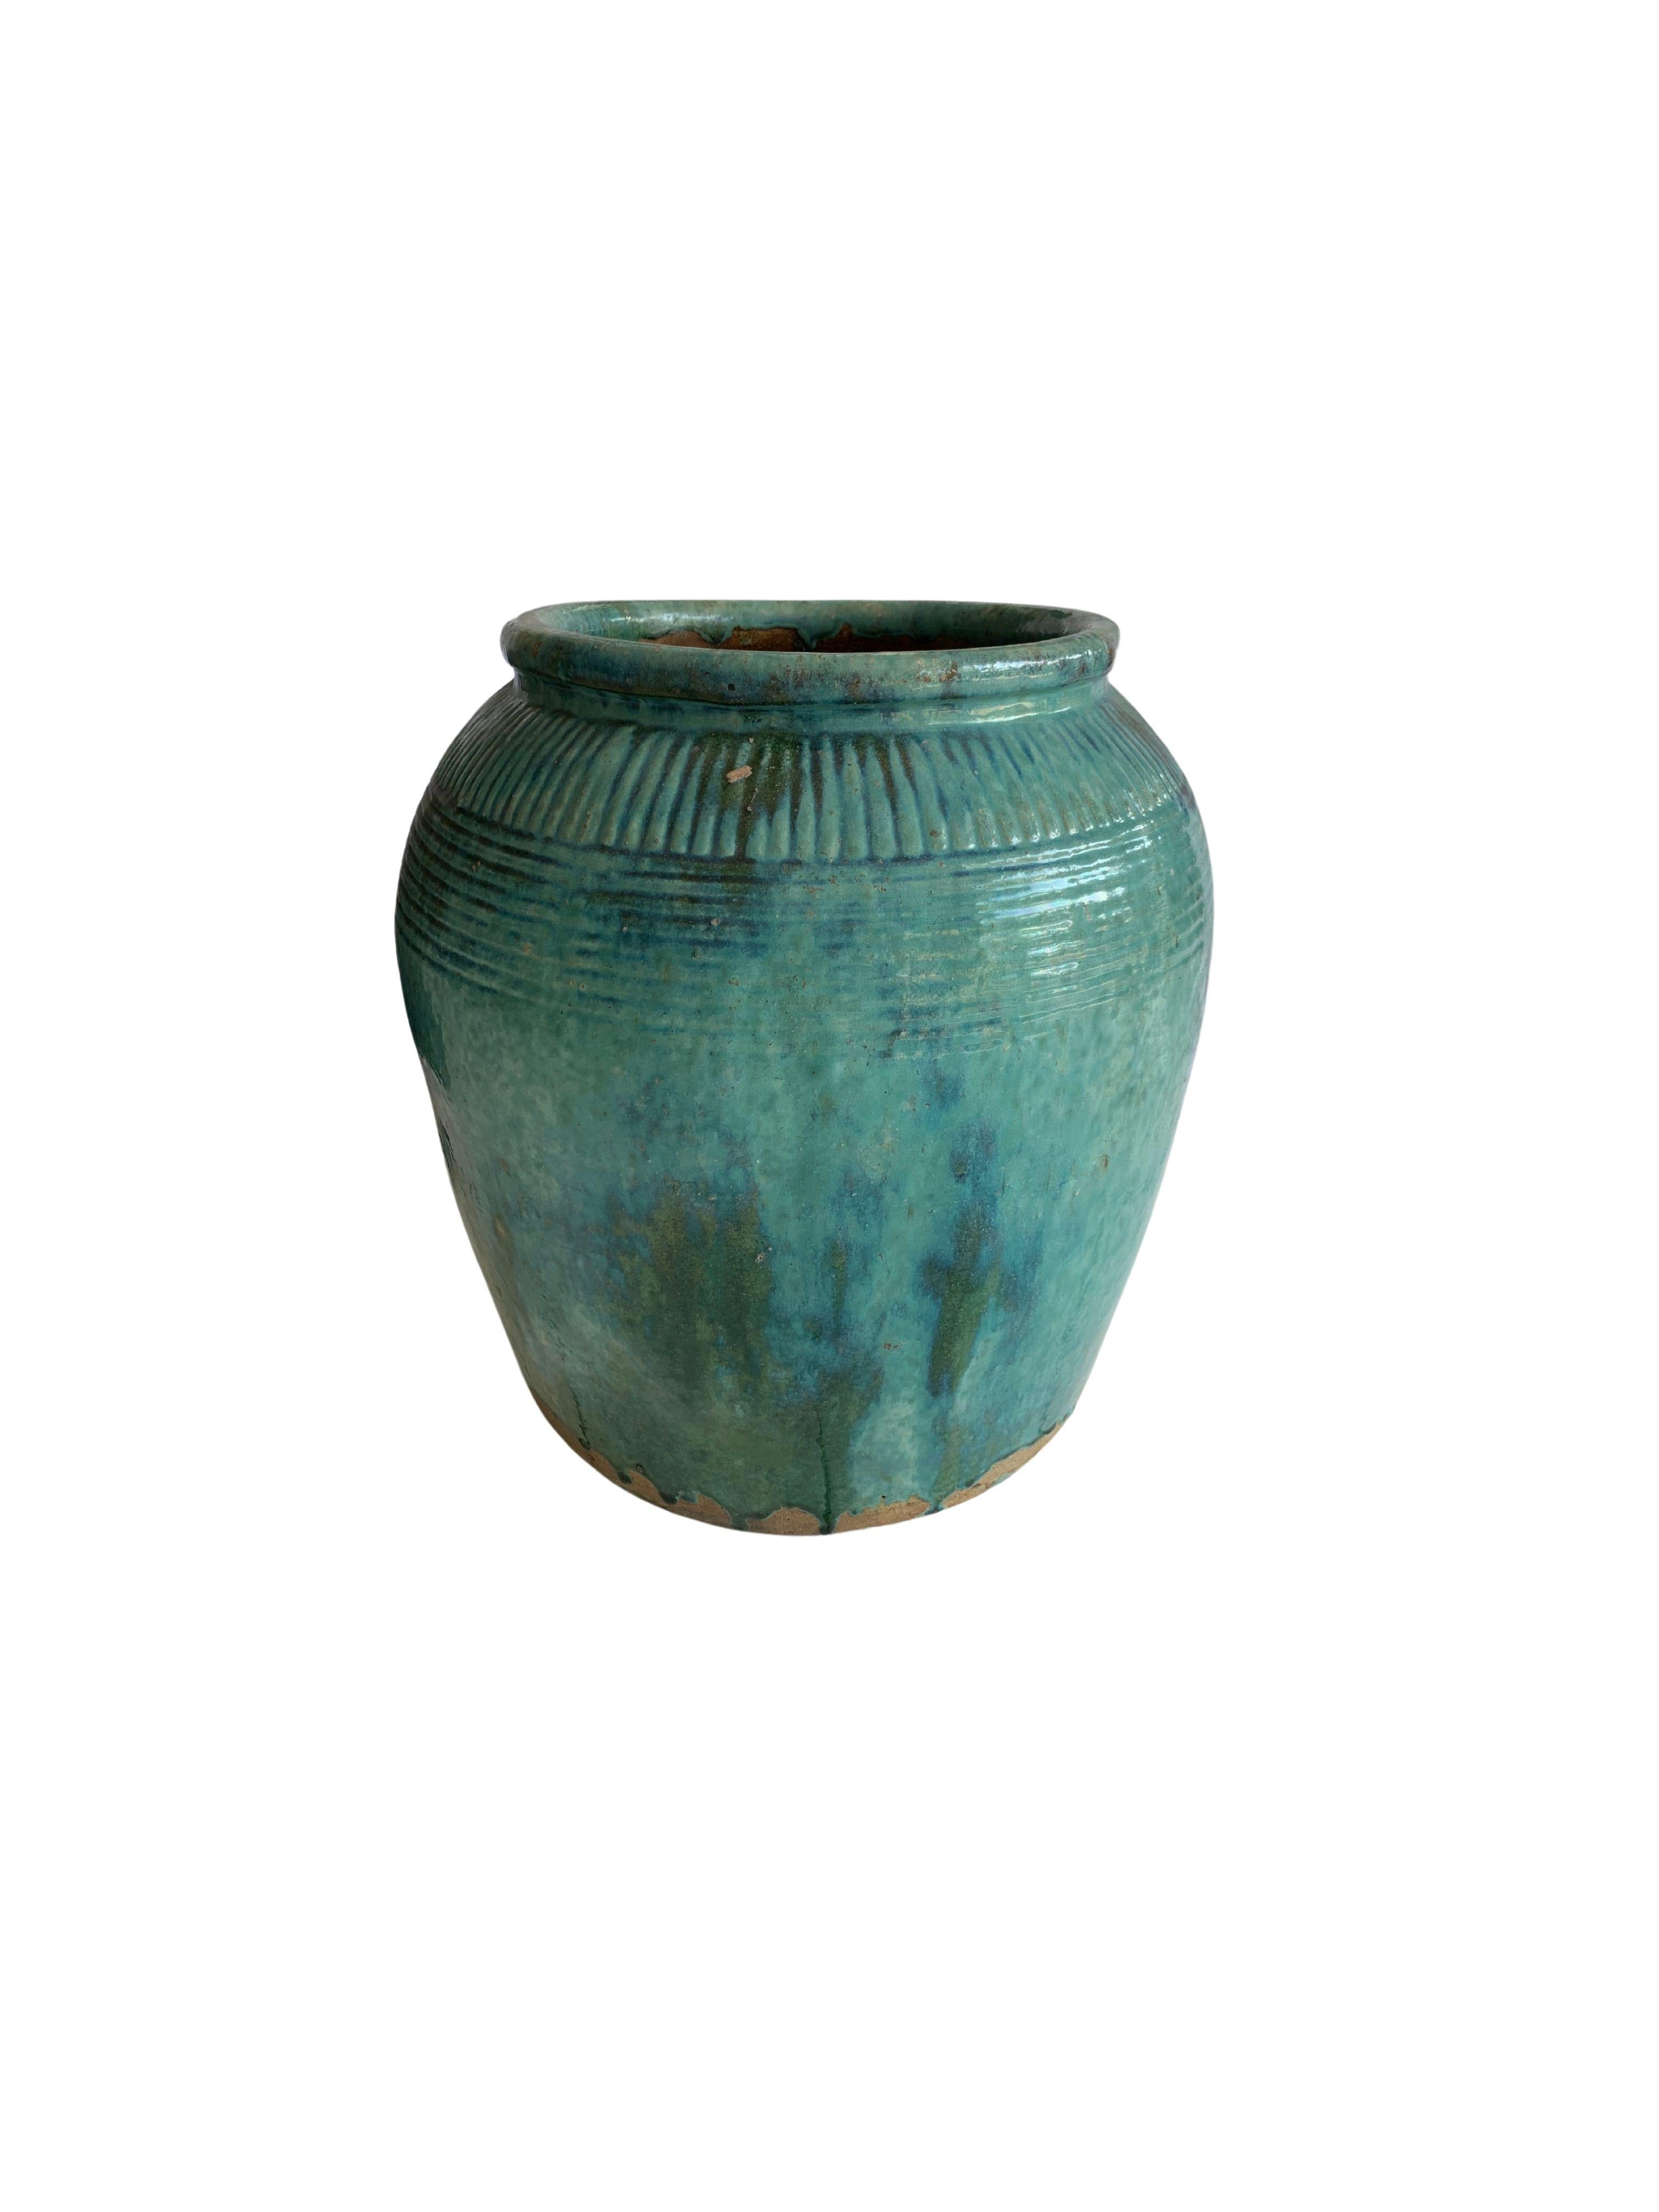 Antique Chinese Green Glazed Ceramic Soy Sauce Jar, c. 1900 In Good Condition In Jimbaran, Bali